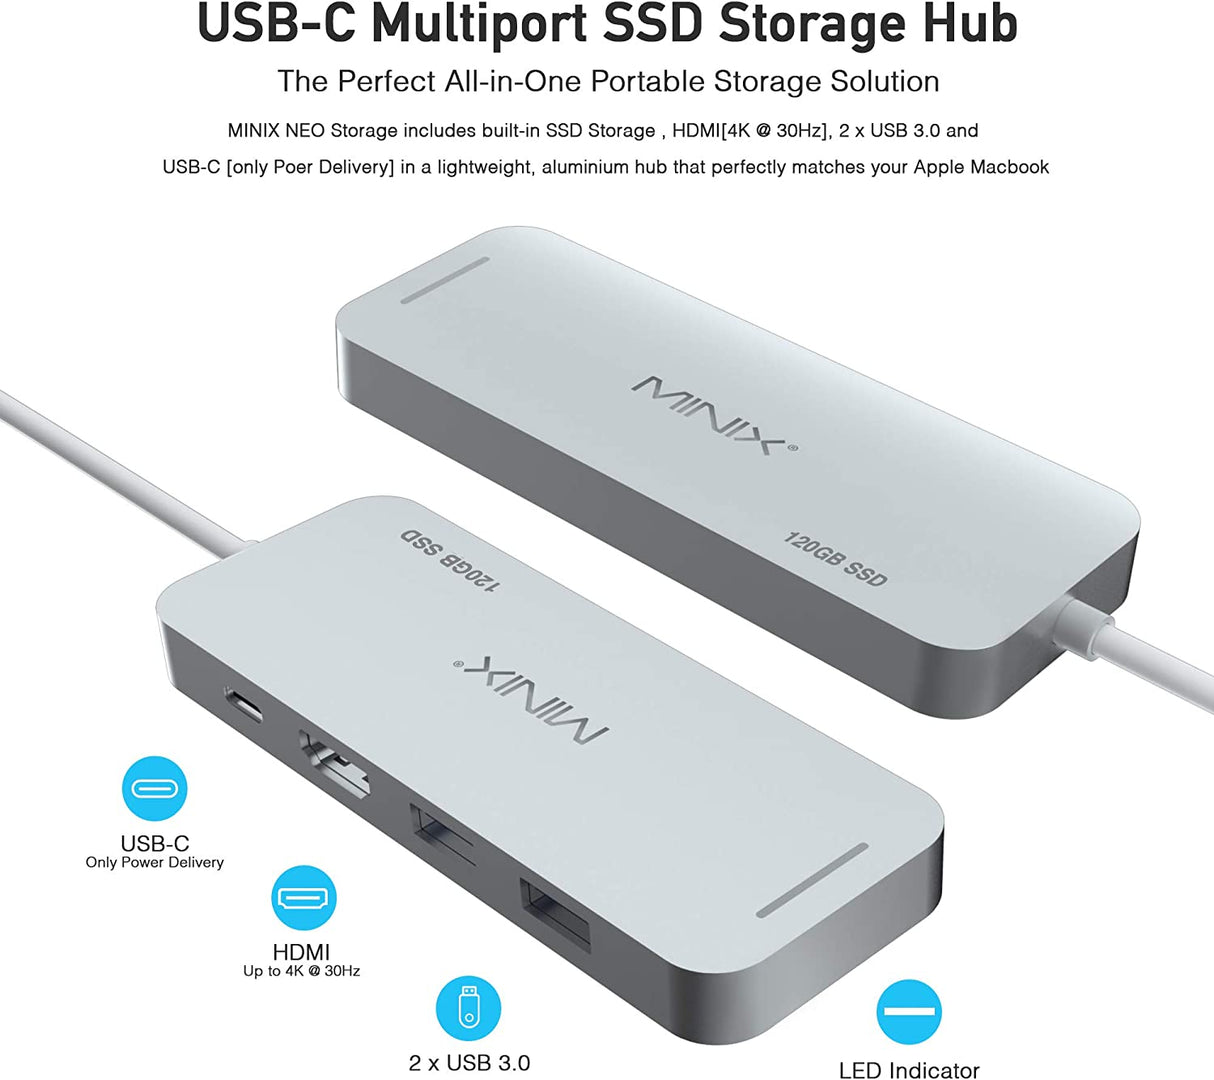 MINIX Storage, 120GB SSD Aluminum USB-C Multiport SSD Storage Hub with Display Output 4K @ 30Hz, 2 x USB 3.0 and USB-C for Power Delivery, Compatible for Apple MacBook. (Silver)